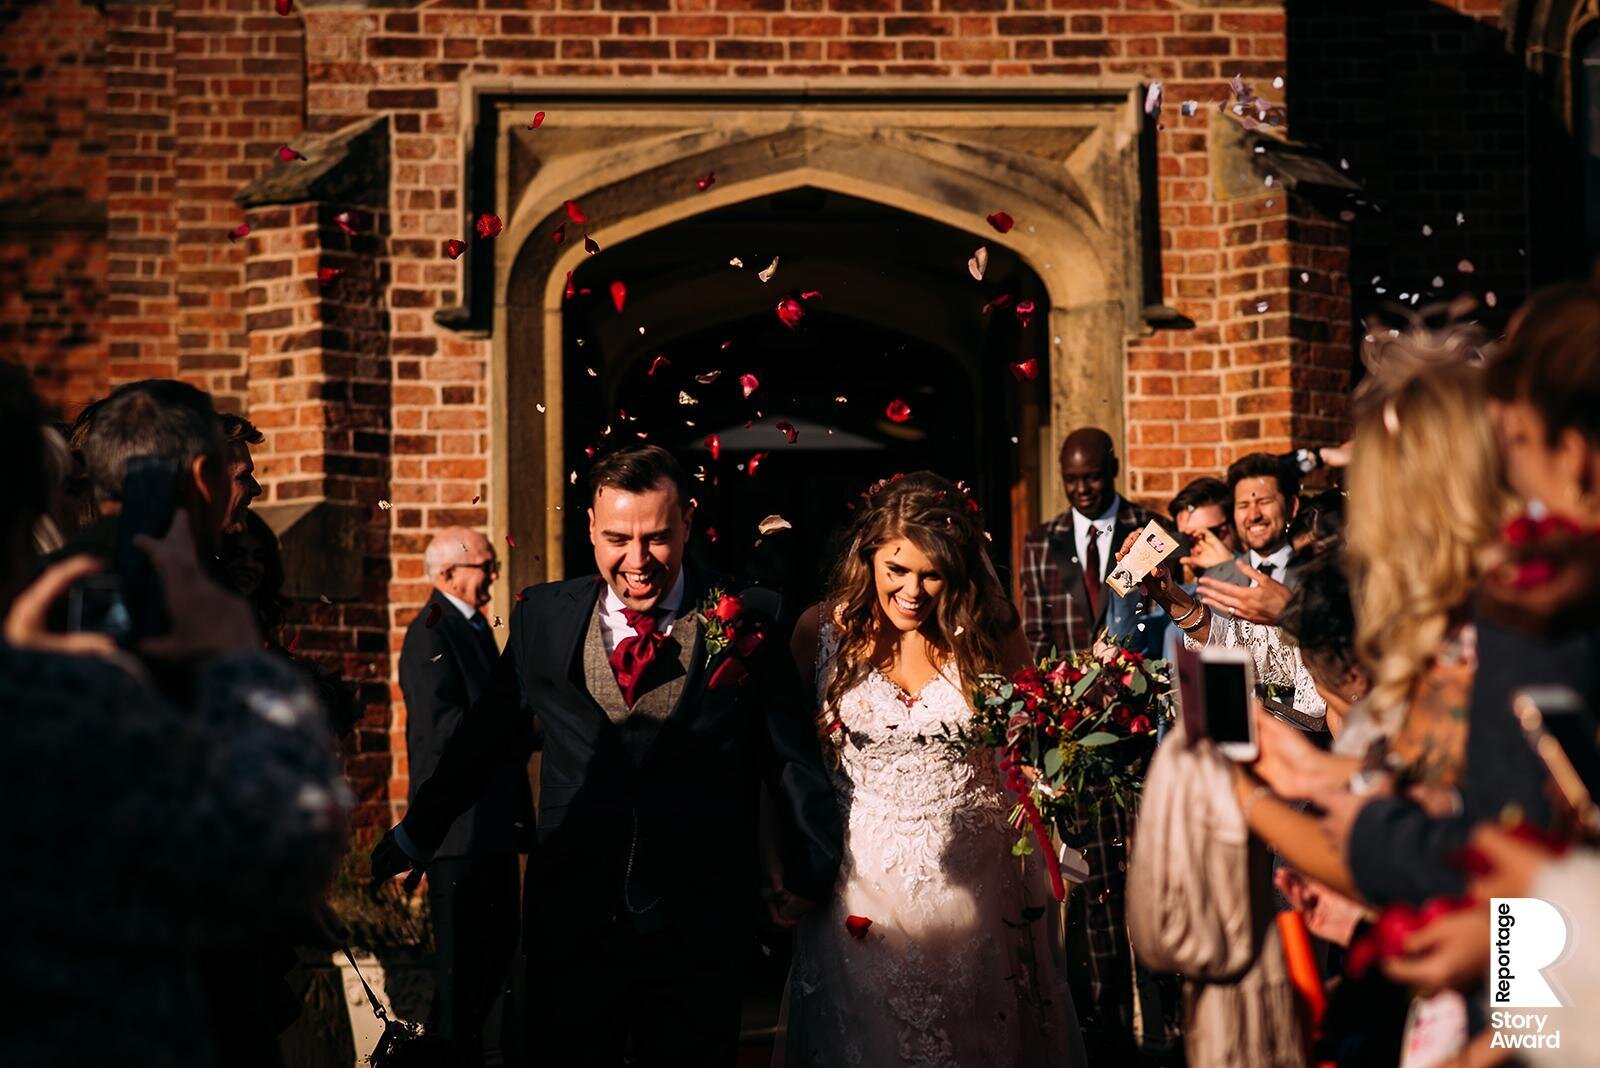  Bride and groom leave church through confetti in strong light 